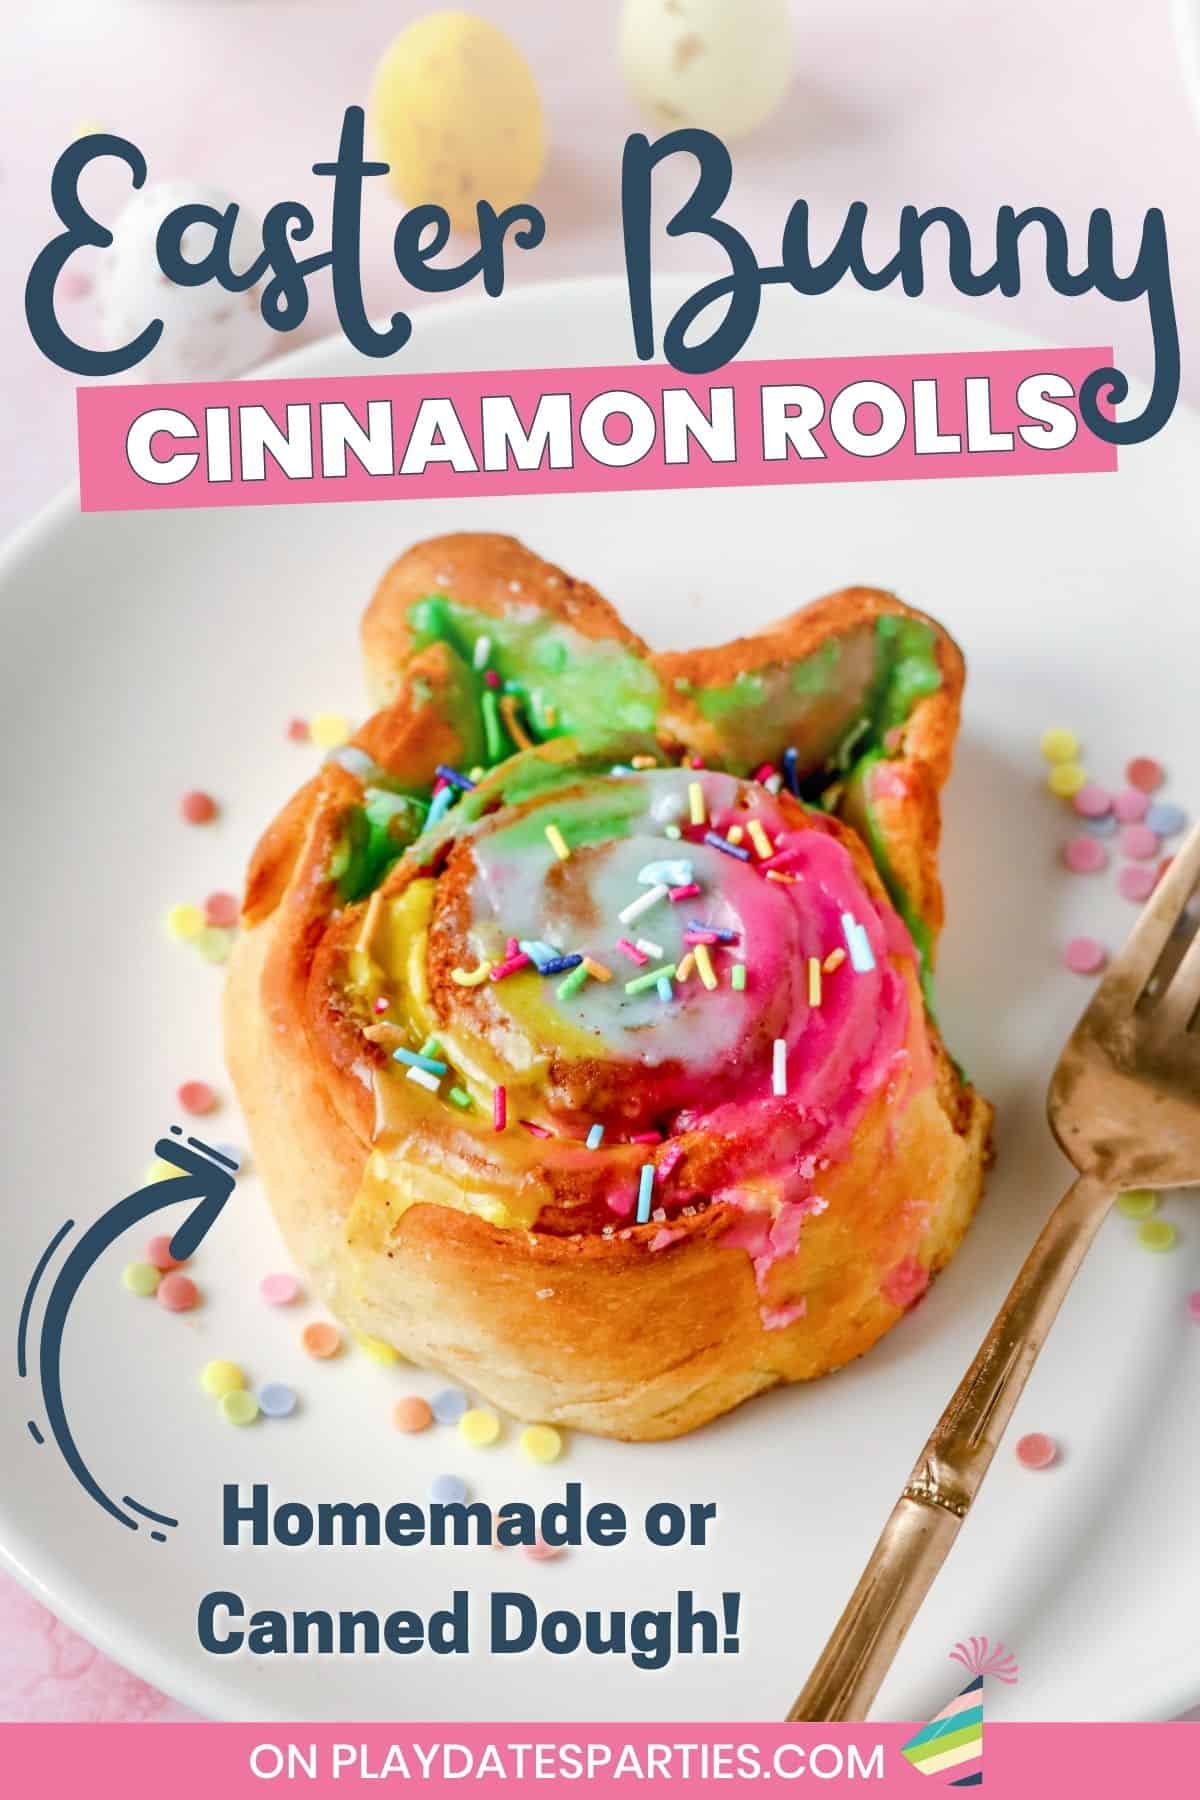 Easter bunny cinnamon rolls with colorful icing either homemade or with canned dough.